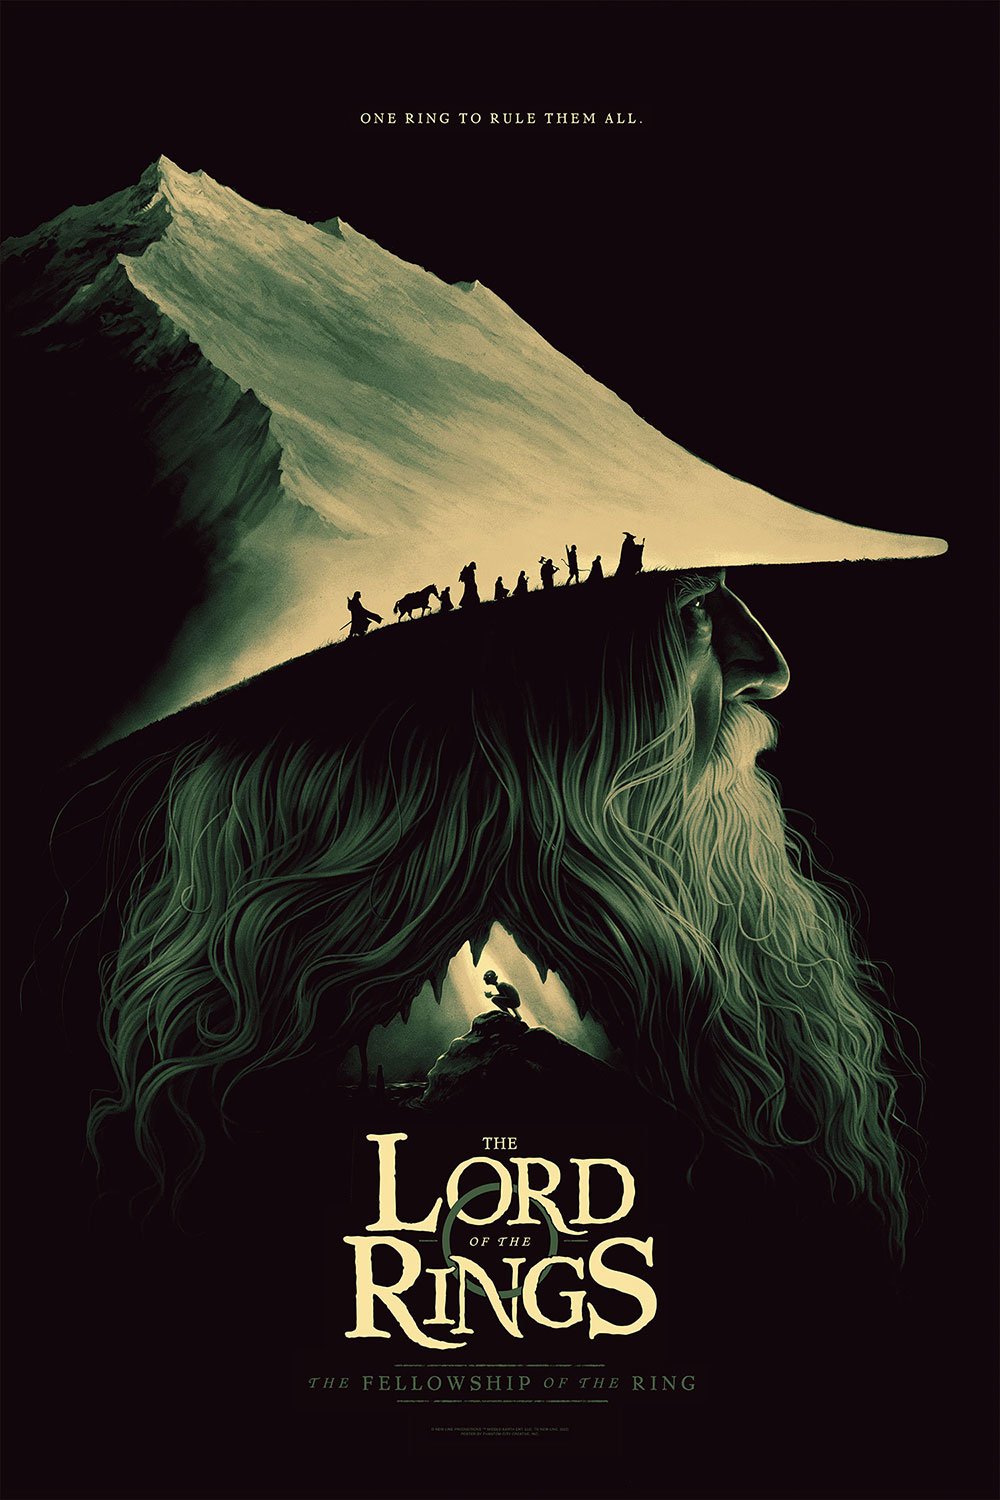 Lord of the Rings Collectibles | Sideshow Collectibles